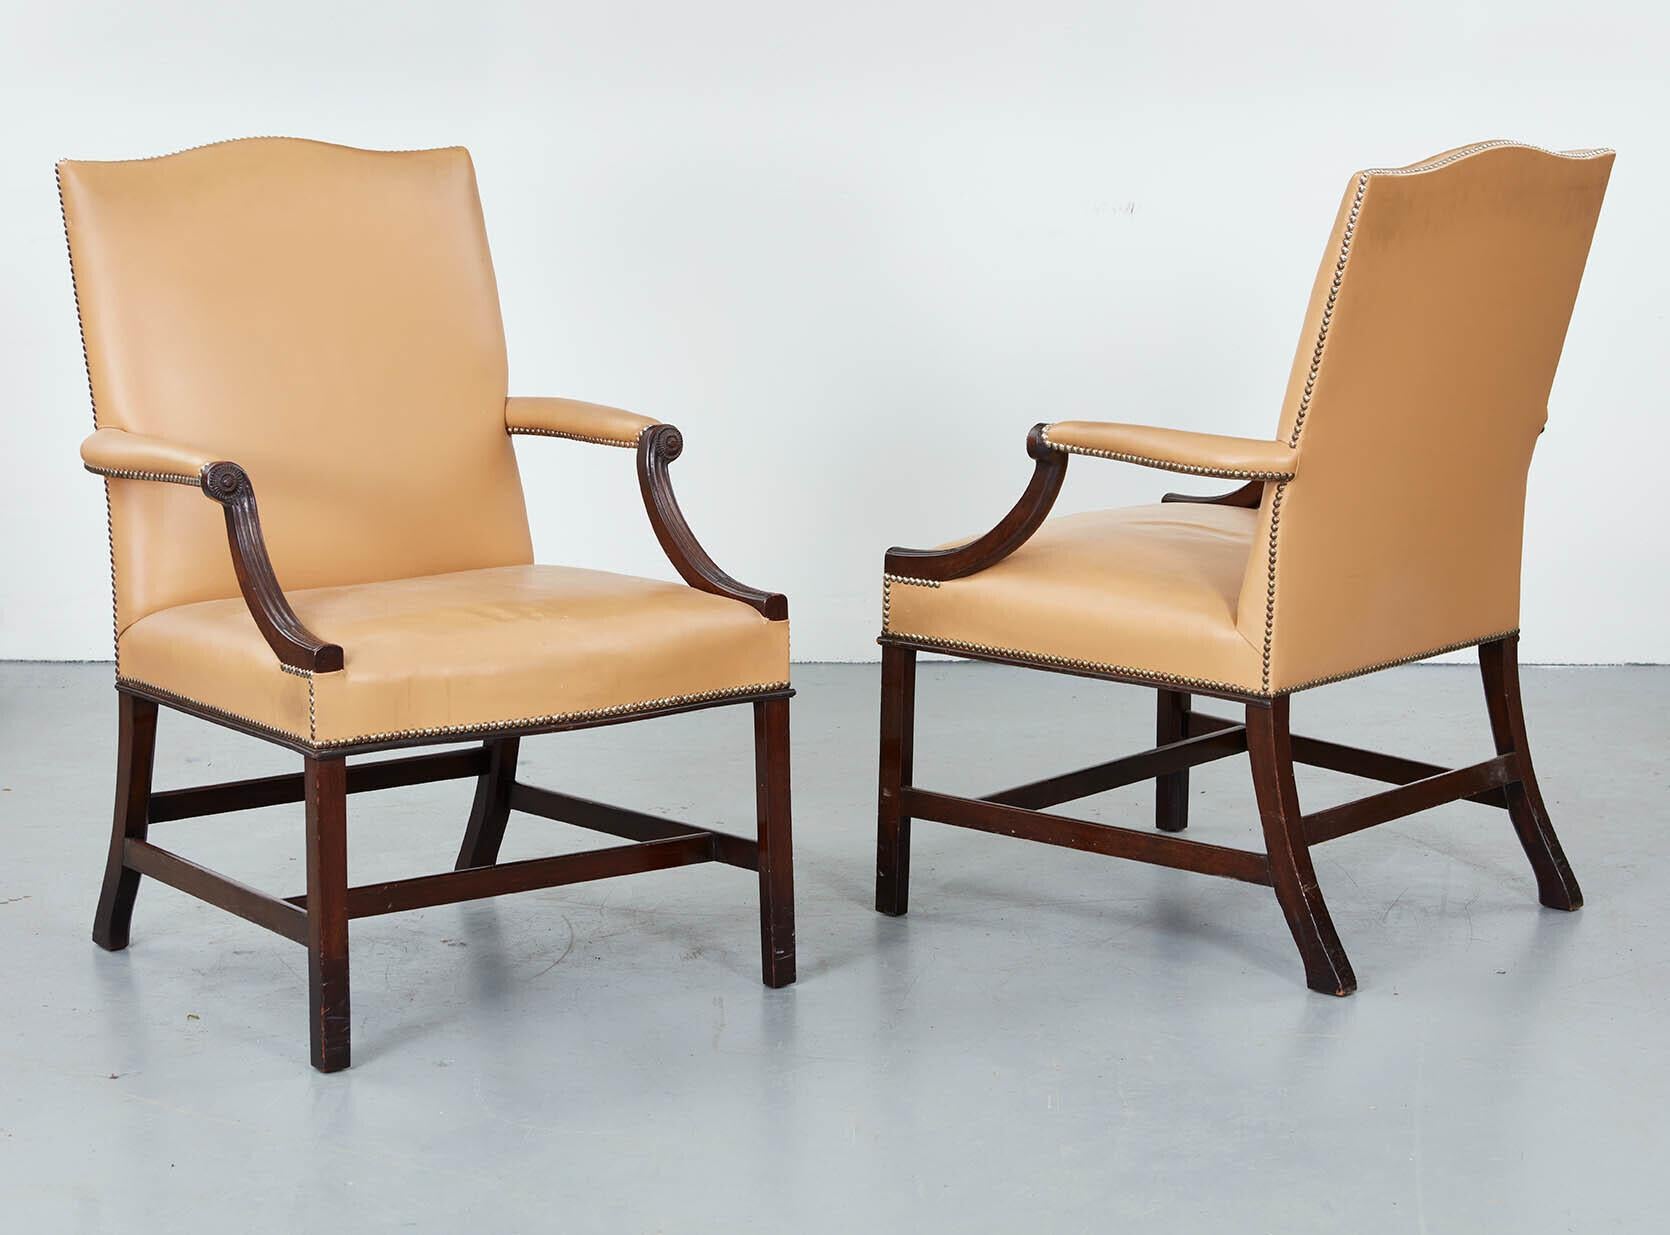 A pair of 1920’s Georgian style Gainsborough chairs in mahogany upholstered in beige leather with close-nailed tacks, having molded down swept arm supports and standing on carved and molded legs joined by stretchers, having good color and great